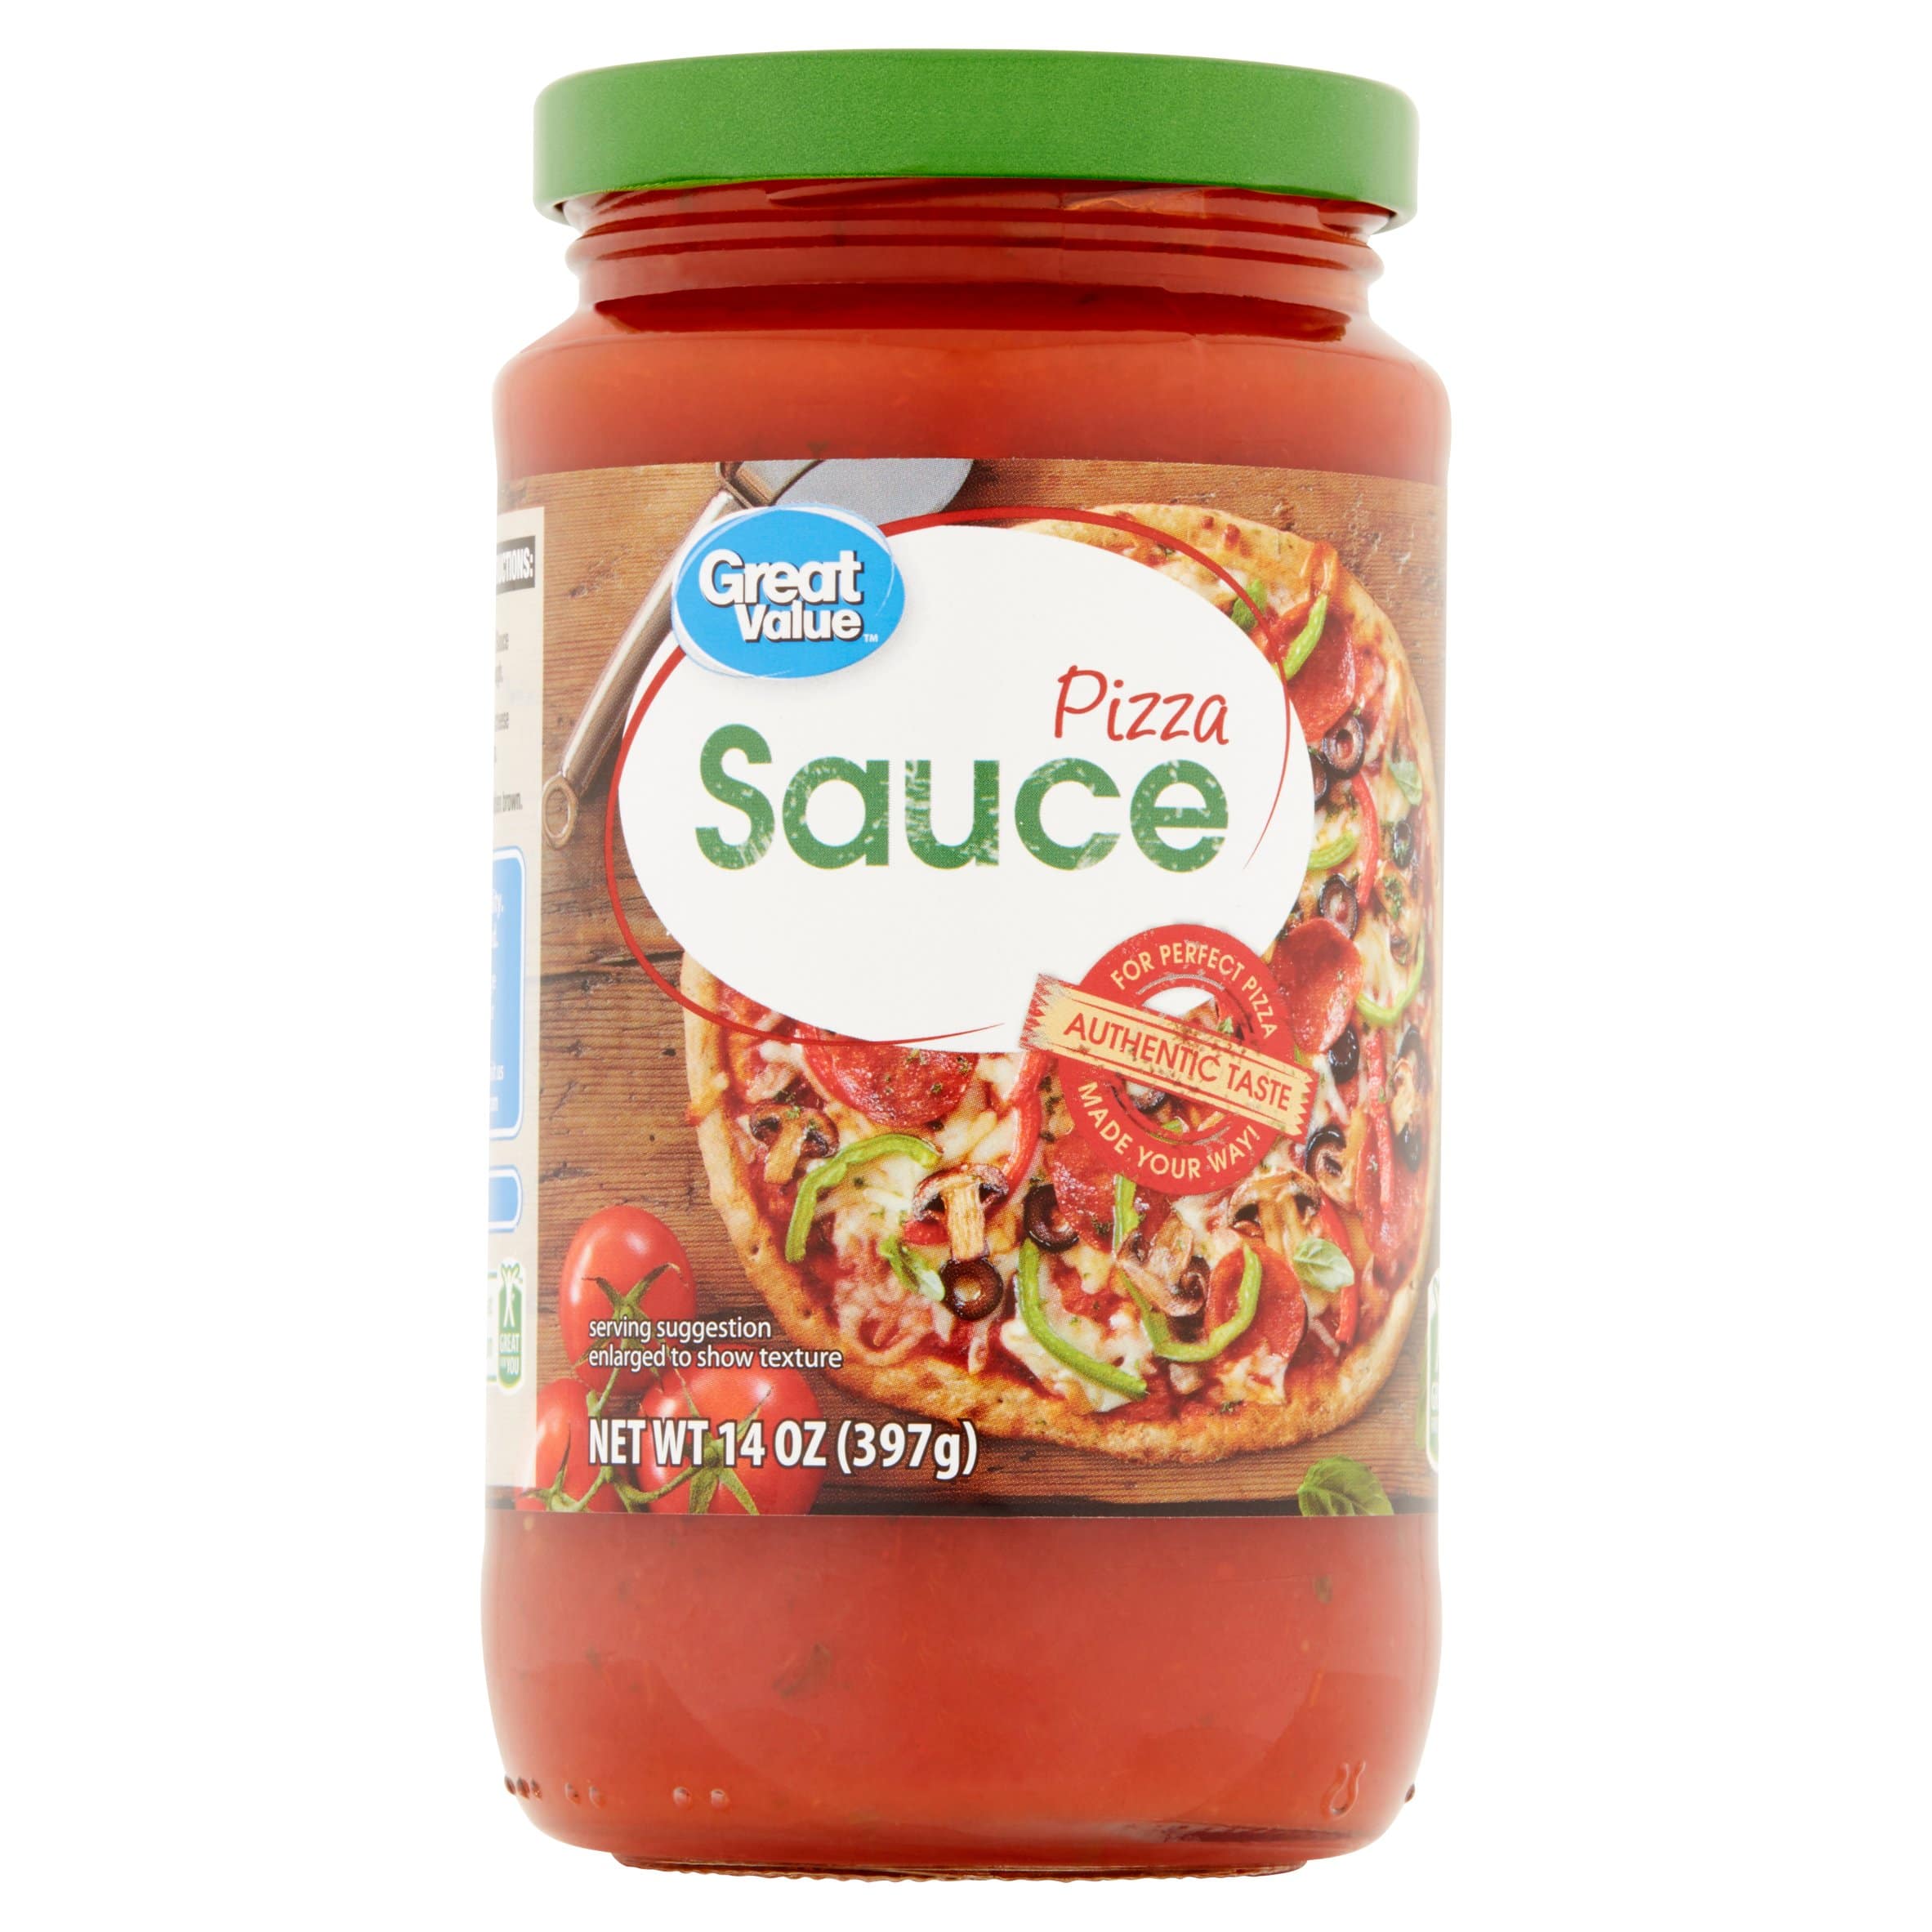 Great Value Pizza Sauce